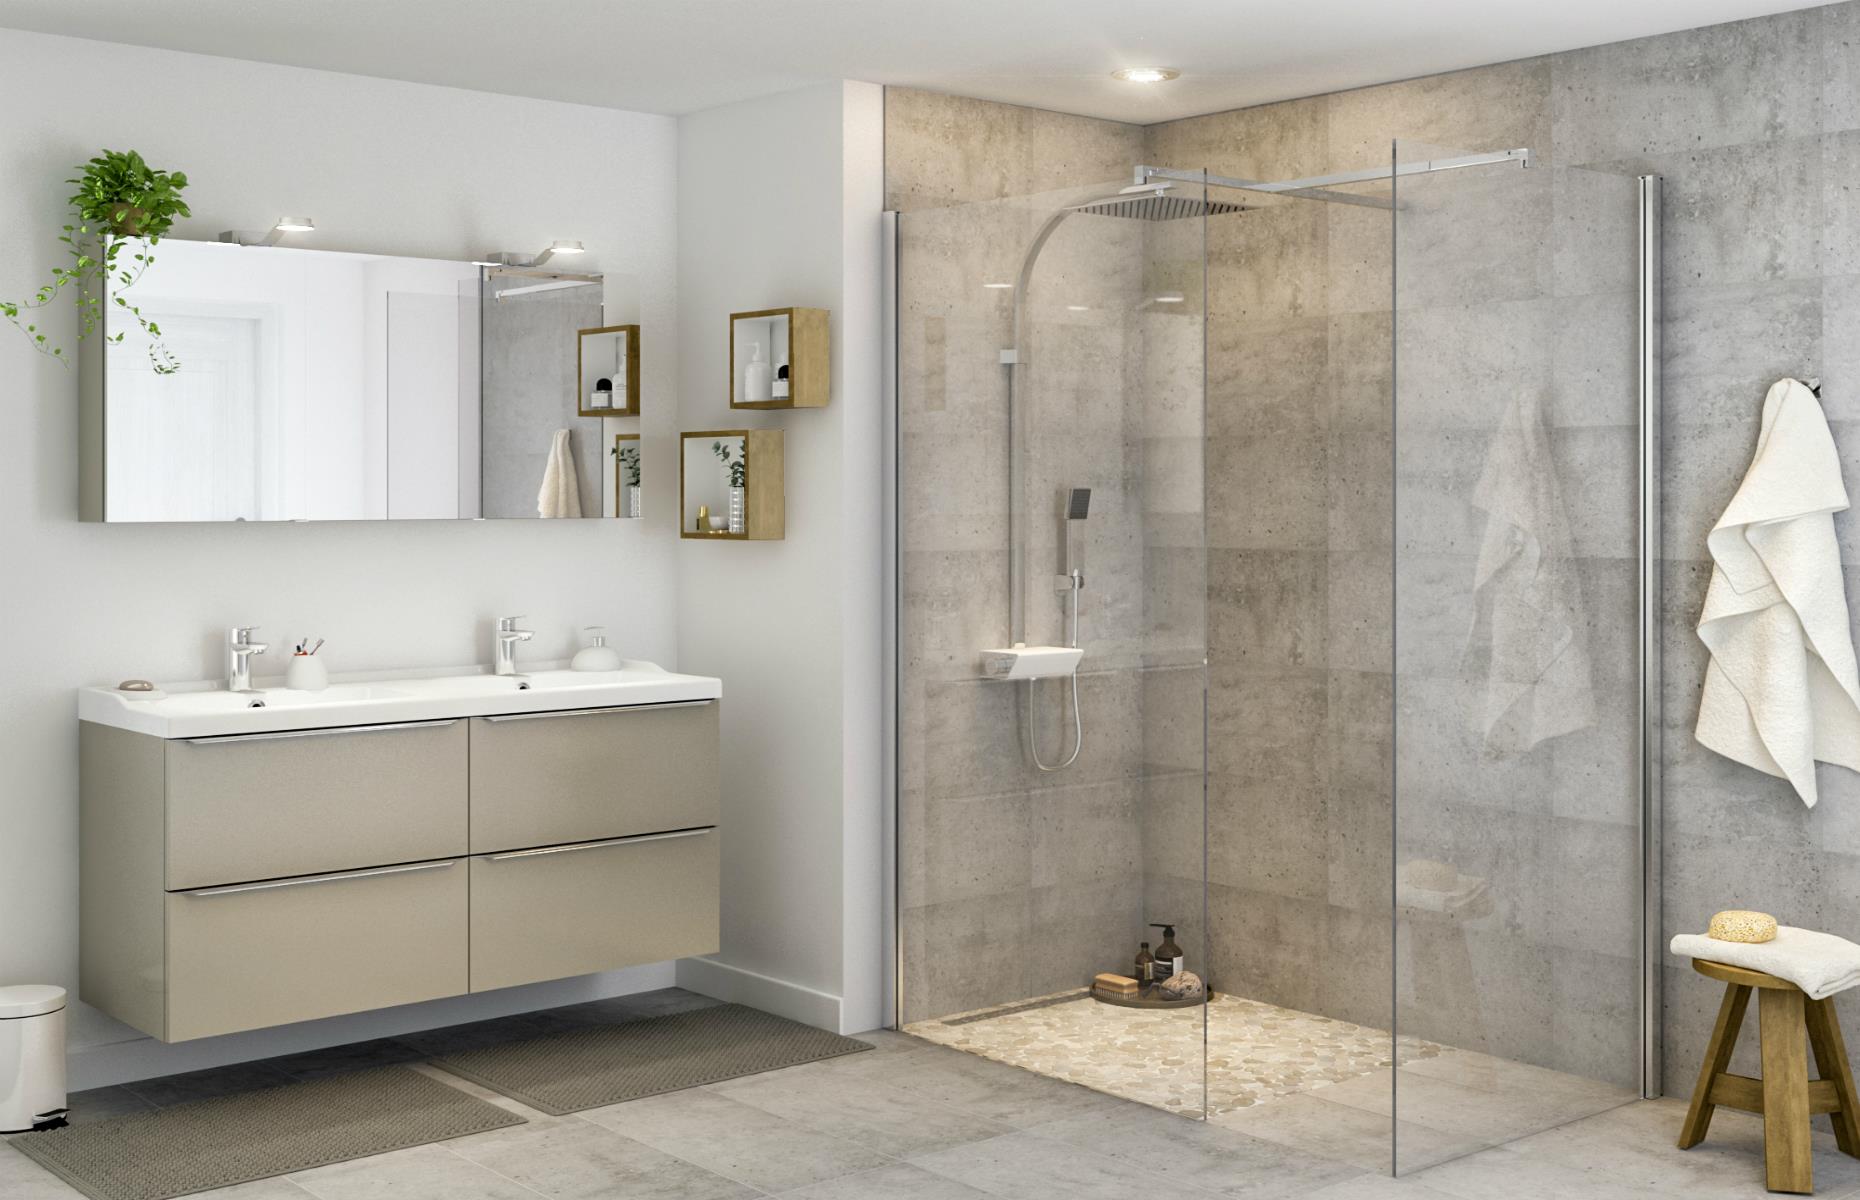 <p>Increase your home’s flexibility so that your living spaces are ready to accommodate changing family circumstances. Install a downstairs cloakroom and shower room for older parents who might move in, or for your own use later in life. An additional <a href="https://www.loveproperty.com/gallerylist/70069/60-stunning-small-bathroom-ideas">bathroom</a> will add value to your home and may be useful if grown-up children return. If you have more than one reception room, think about earmarking it as a bedroom for future use.</p>